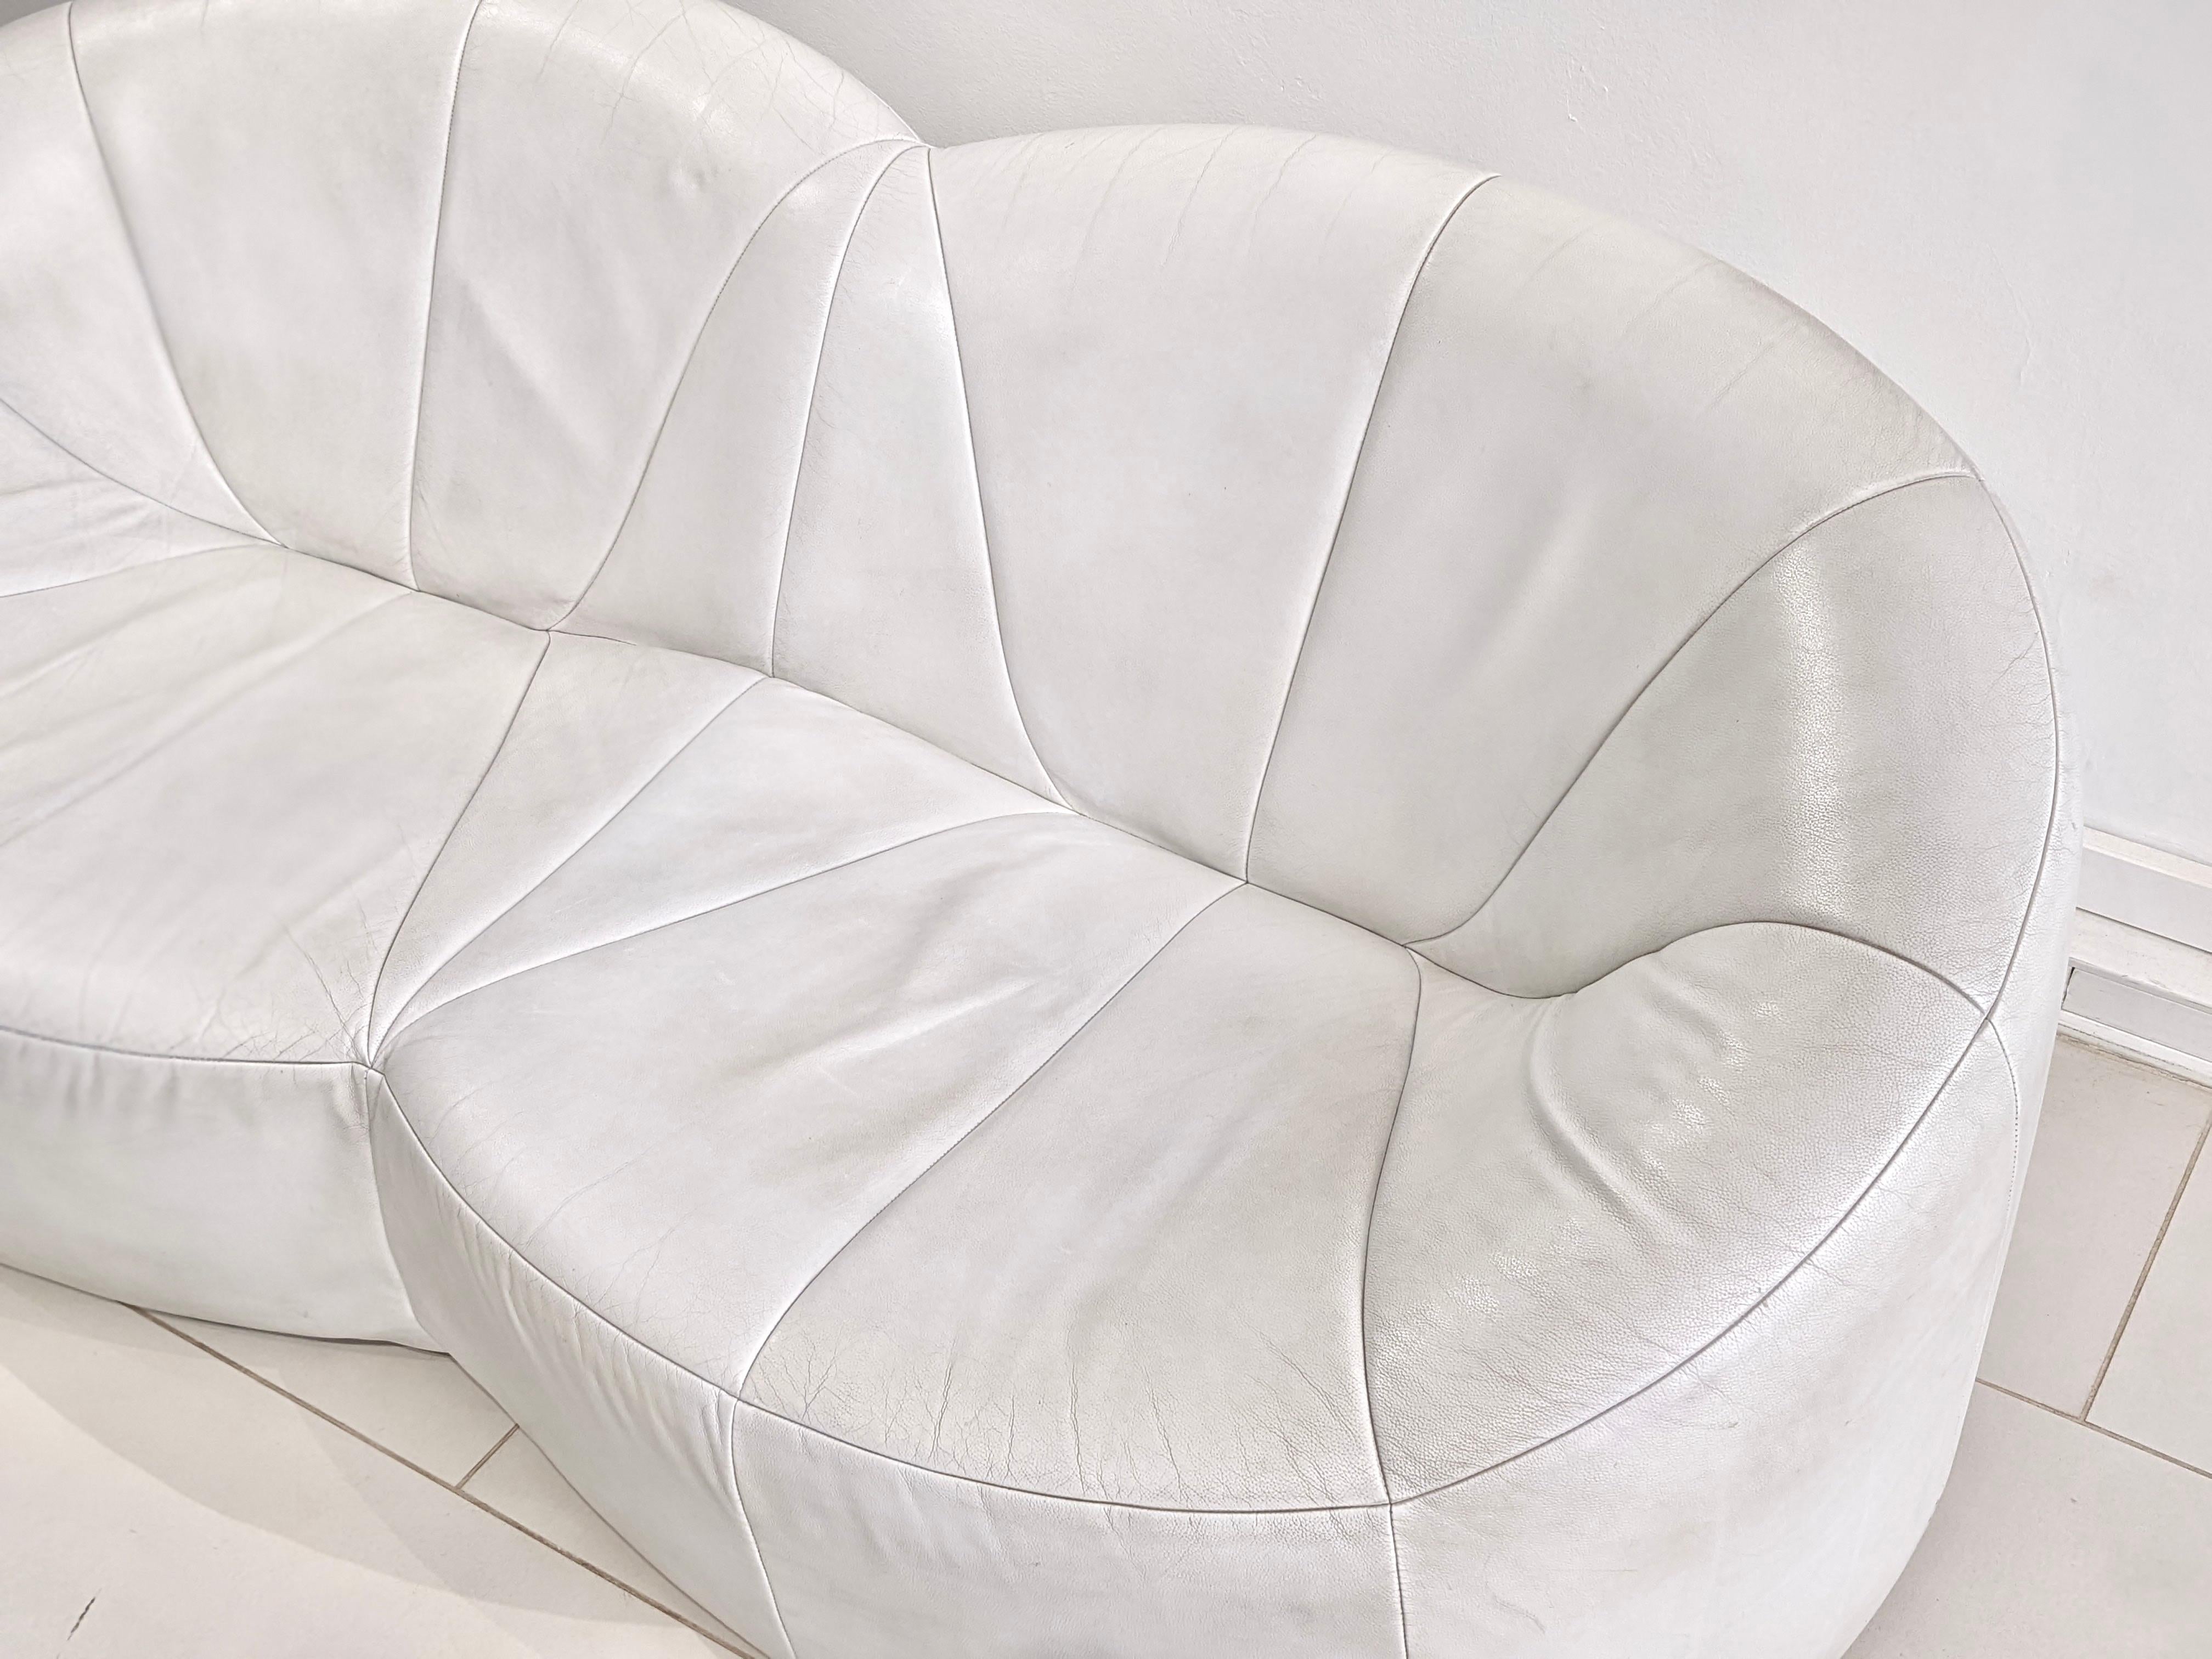 2 seater pumpkin sofa by Pierre Paulin. 
White leather. Good condition. Designed in 1971 for the private flats of Claude and Georges Pompidou at the Elysée Palace.
Circa 1980. 
Provenance: France 

Dimensions: W178 cm x H70 cm x D83 cm.